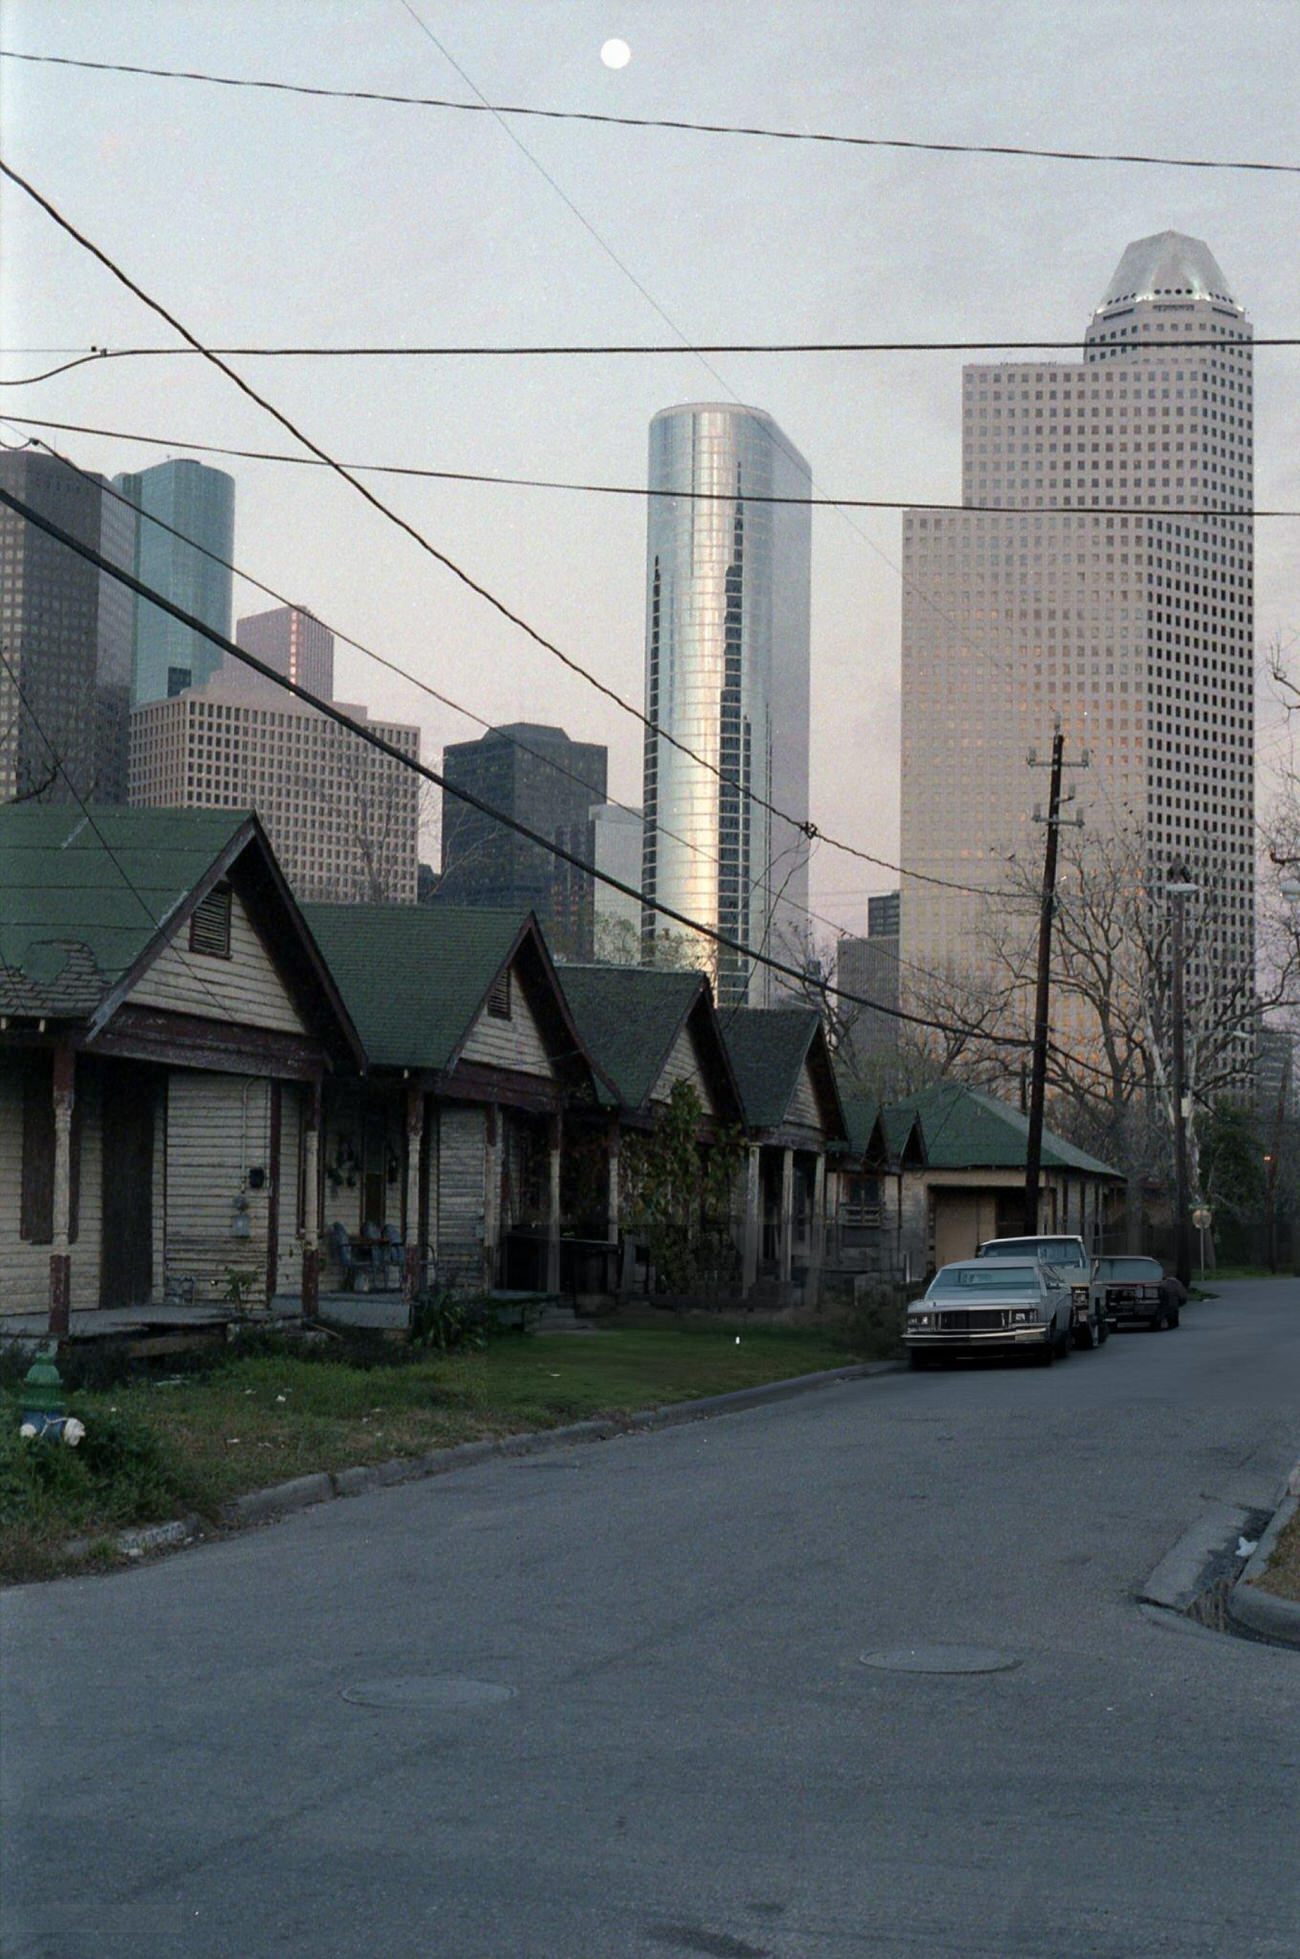 Moonrise over downtown Houston from the Fourth Ward, Houston, Texas, February 11, 1987.